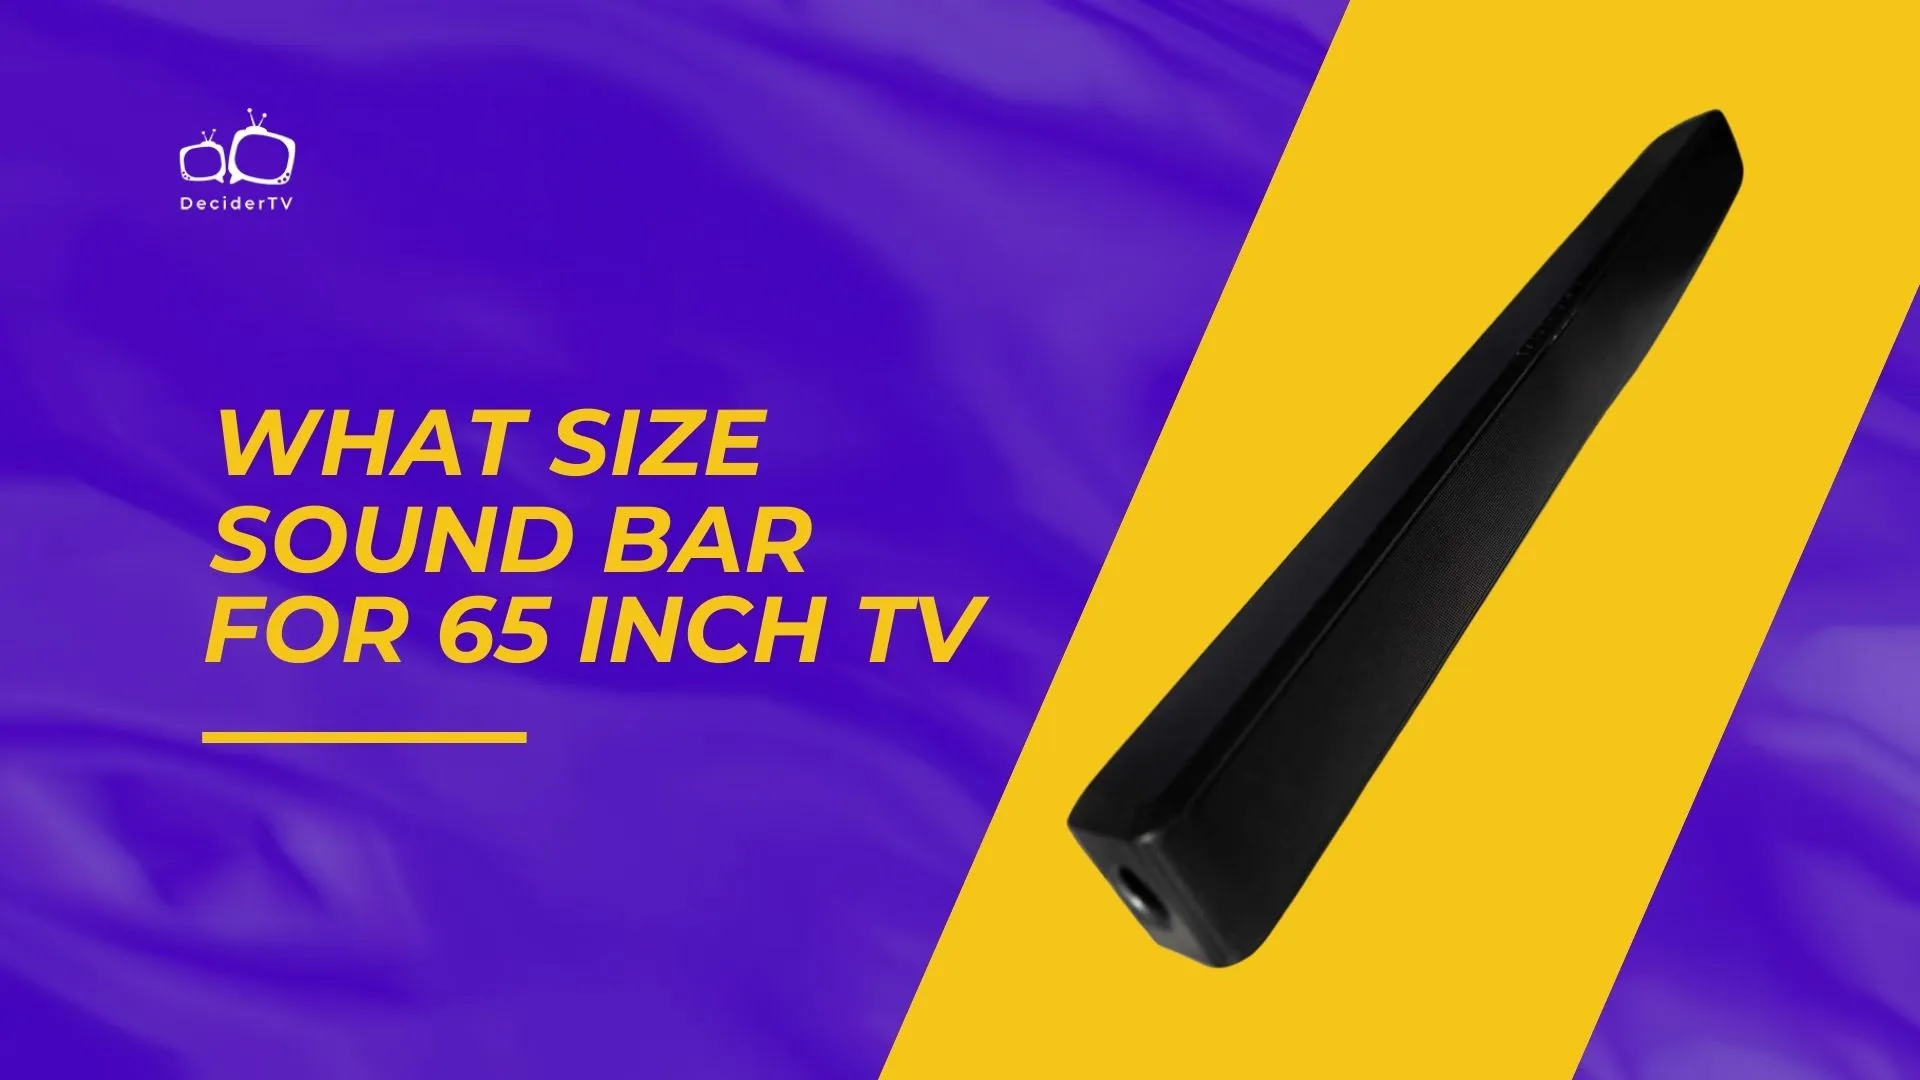 What Size Sound Bar for 65 Inch TV